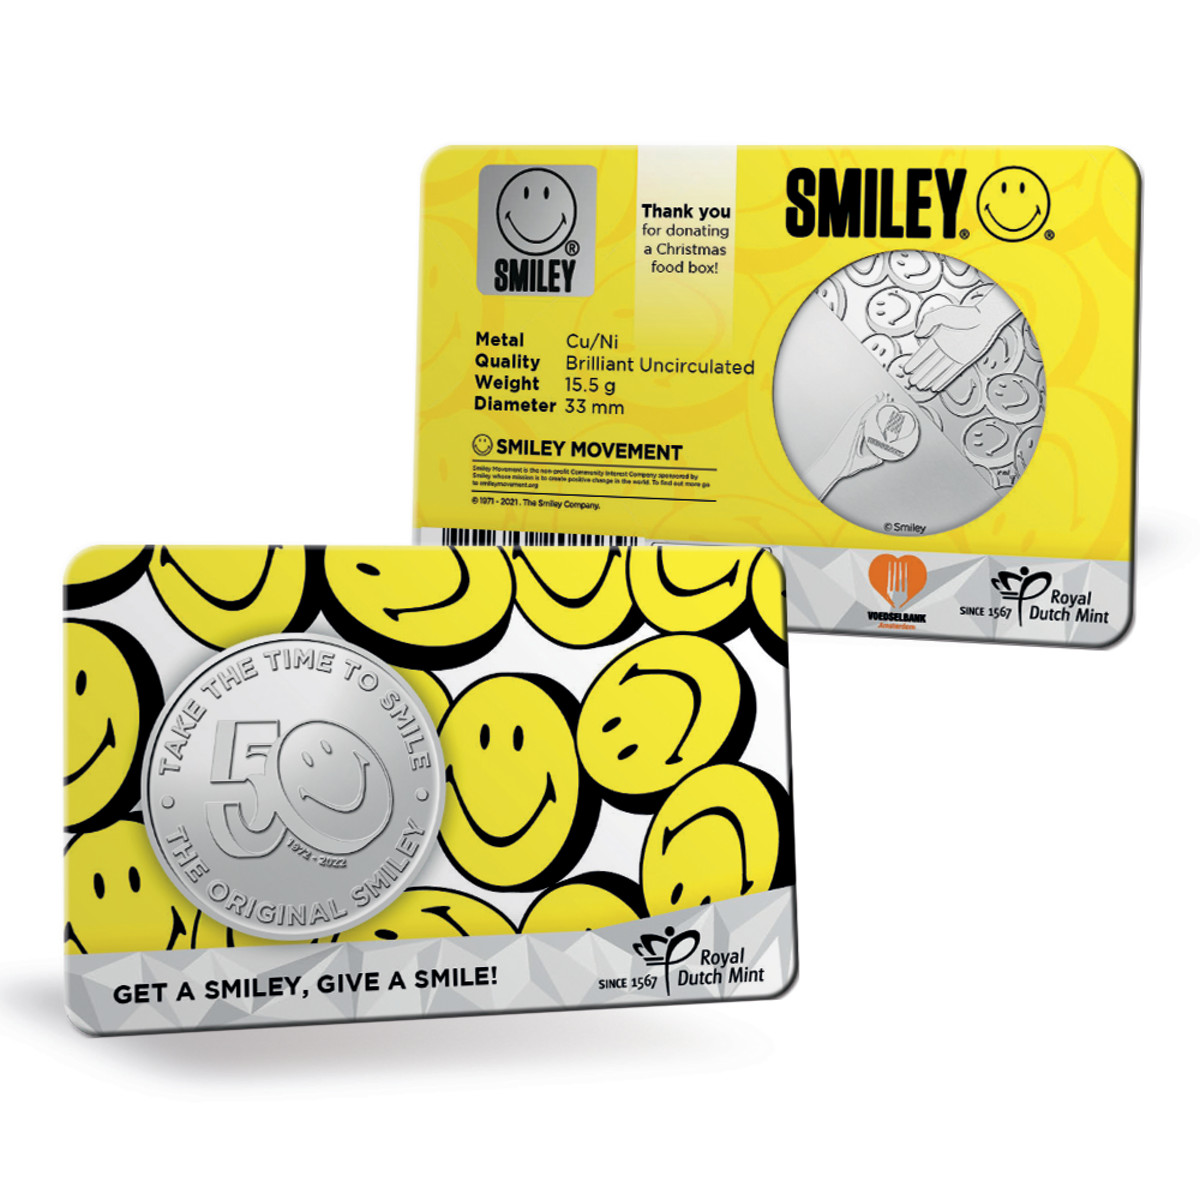 Using their traditional coin card packaging to its utmost advantage, the Royal Dutch Mint has provided the Smiley Movement with a very strong face on charitable giving with their 50th Anniversary Original Smiley coin release.